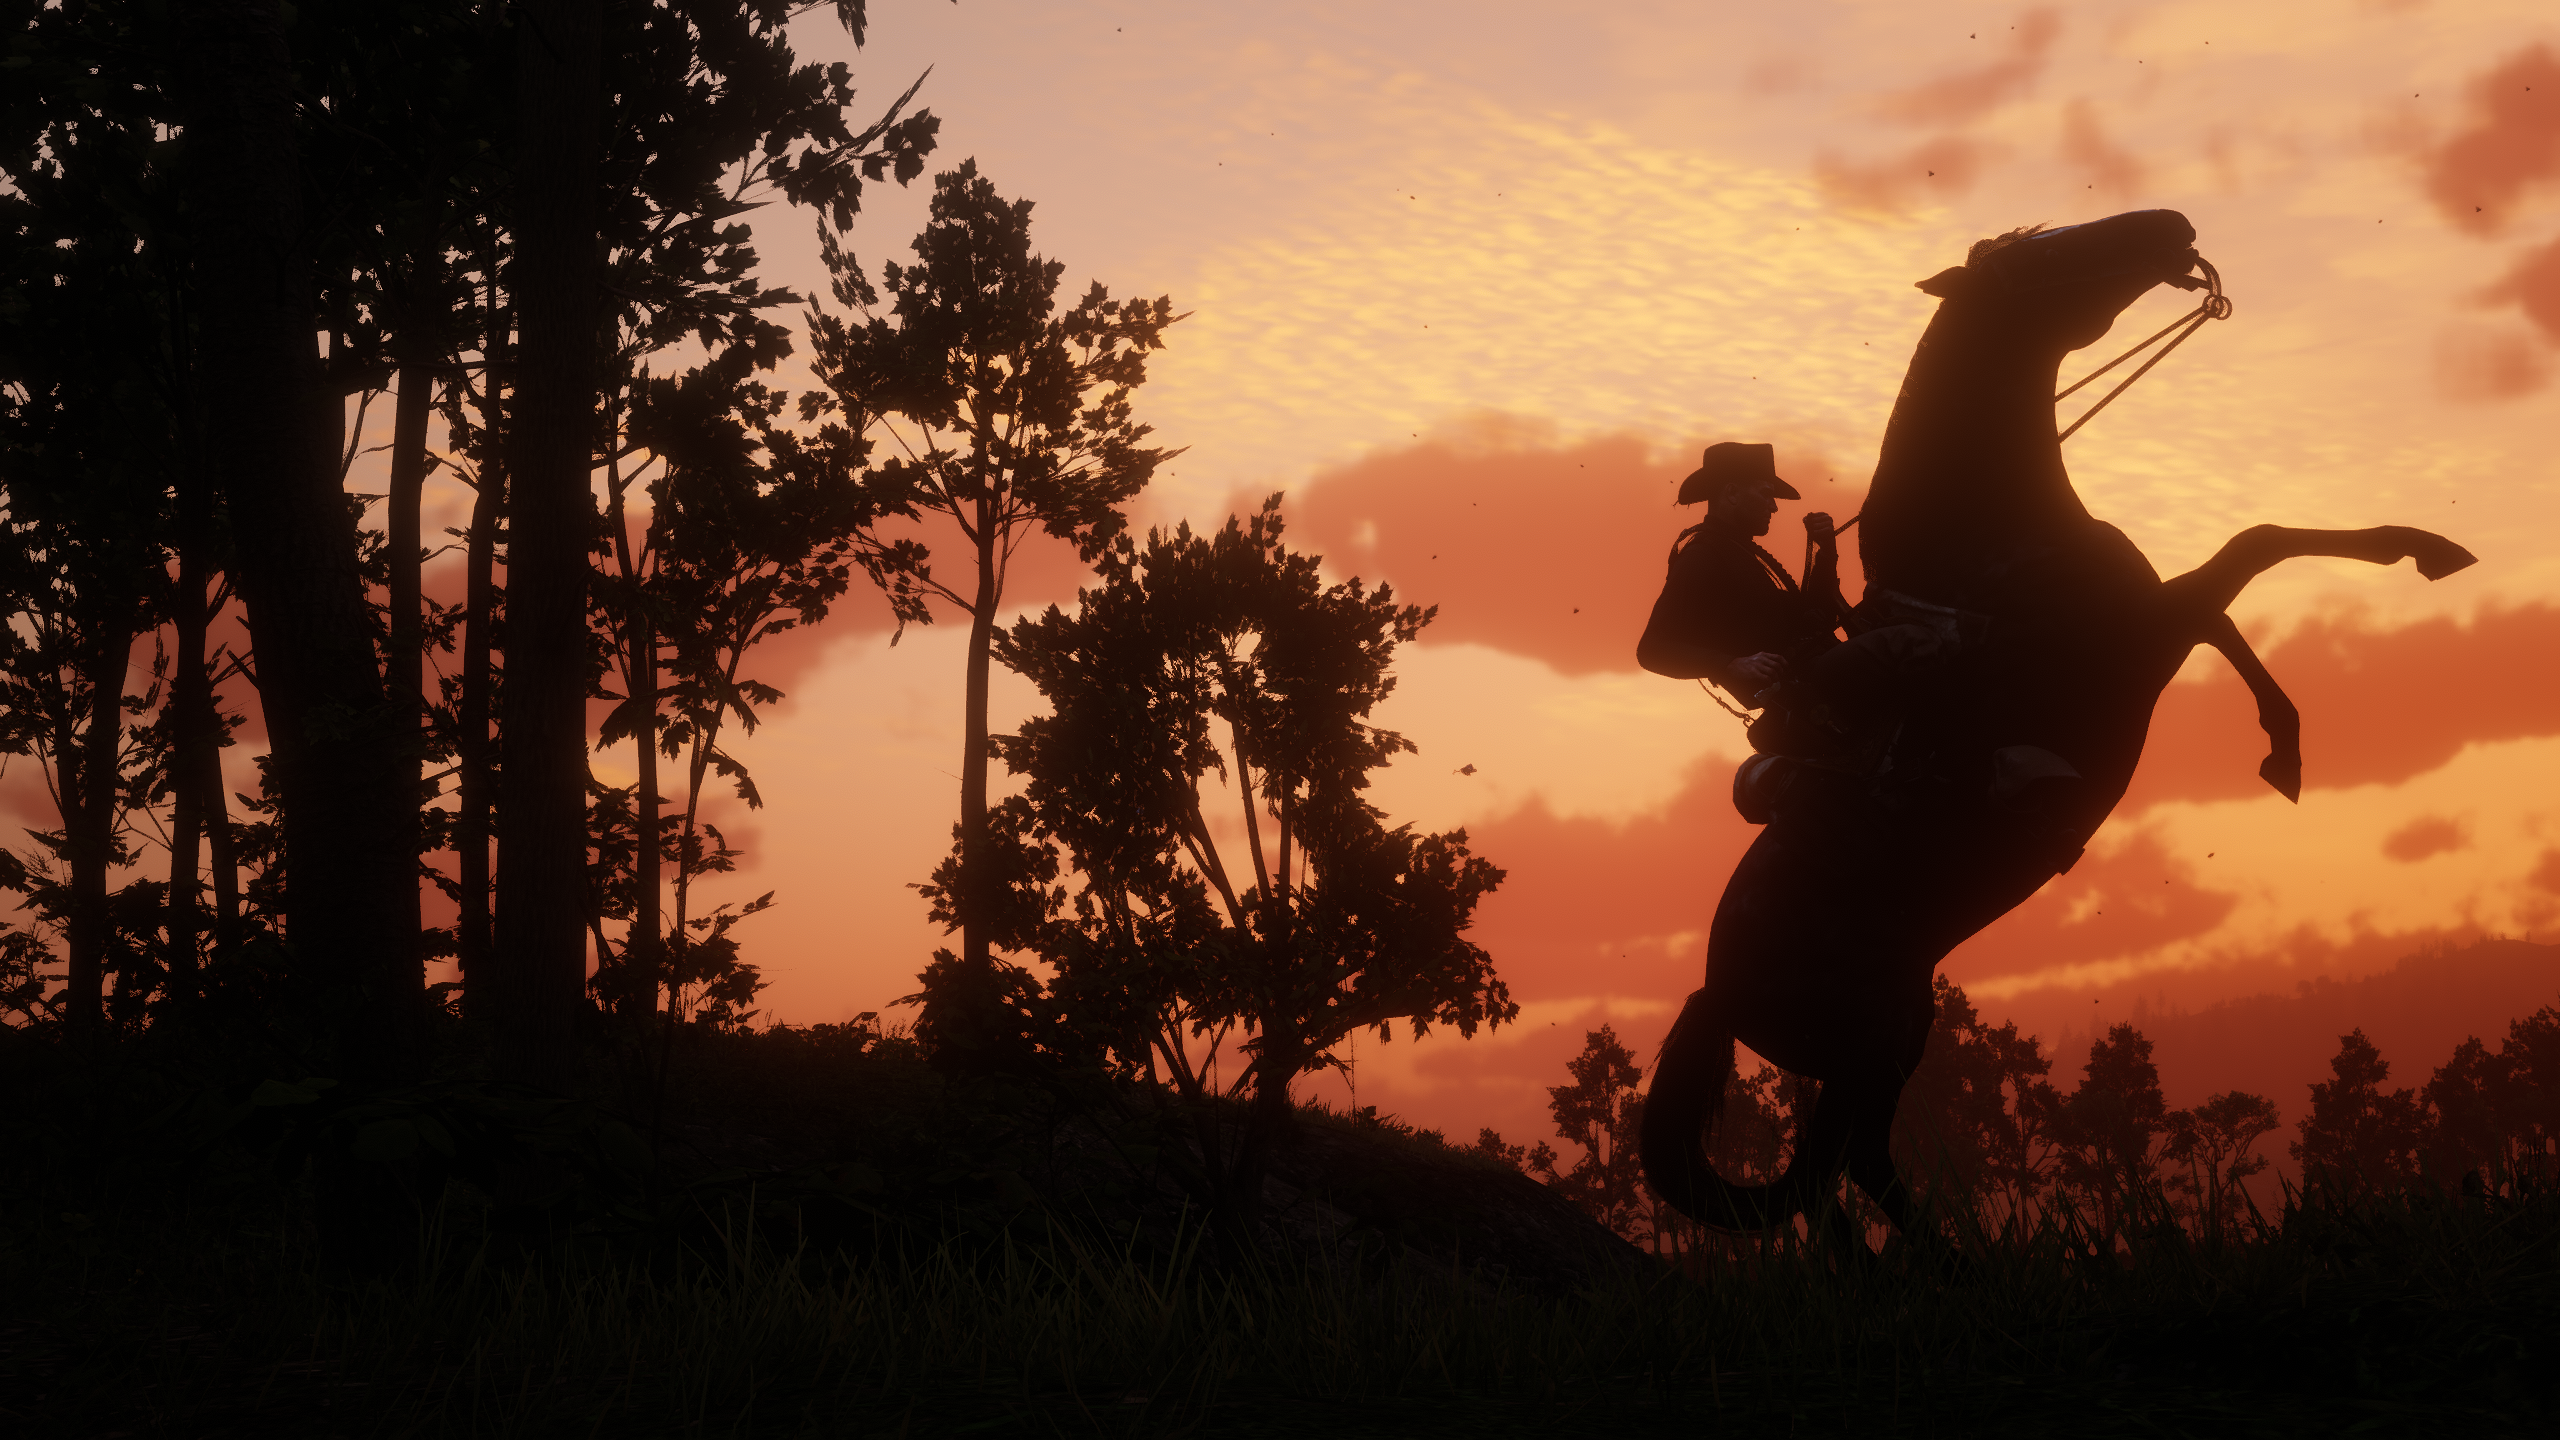 Red Dead Redemption 2 Red Dead Redemption Ii Video Games Sunset Forest 2560x1440